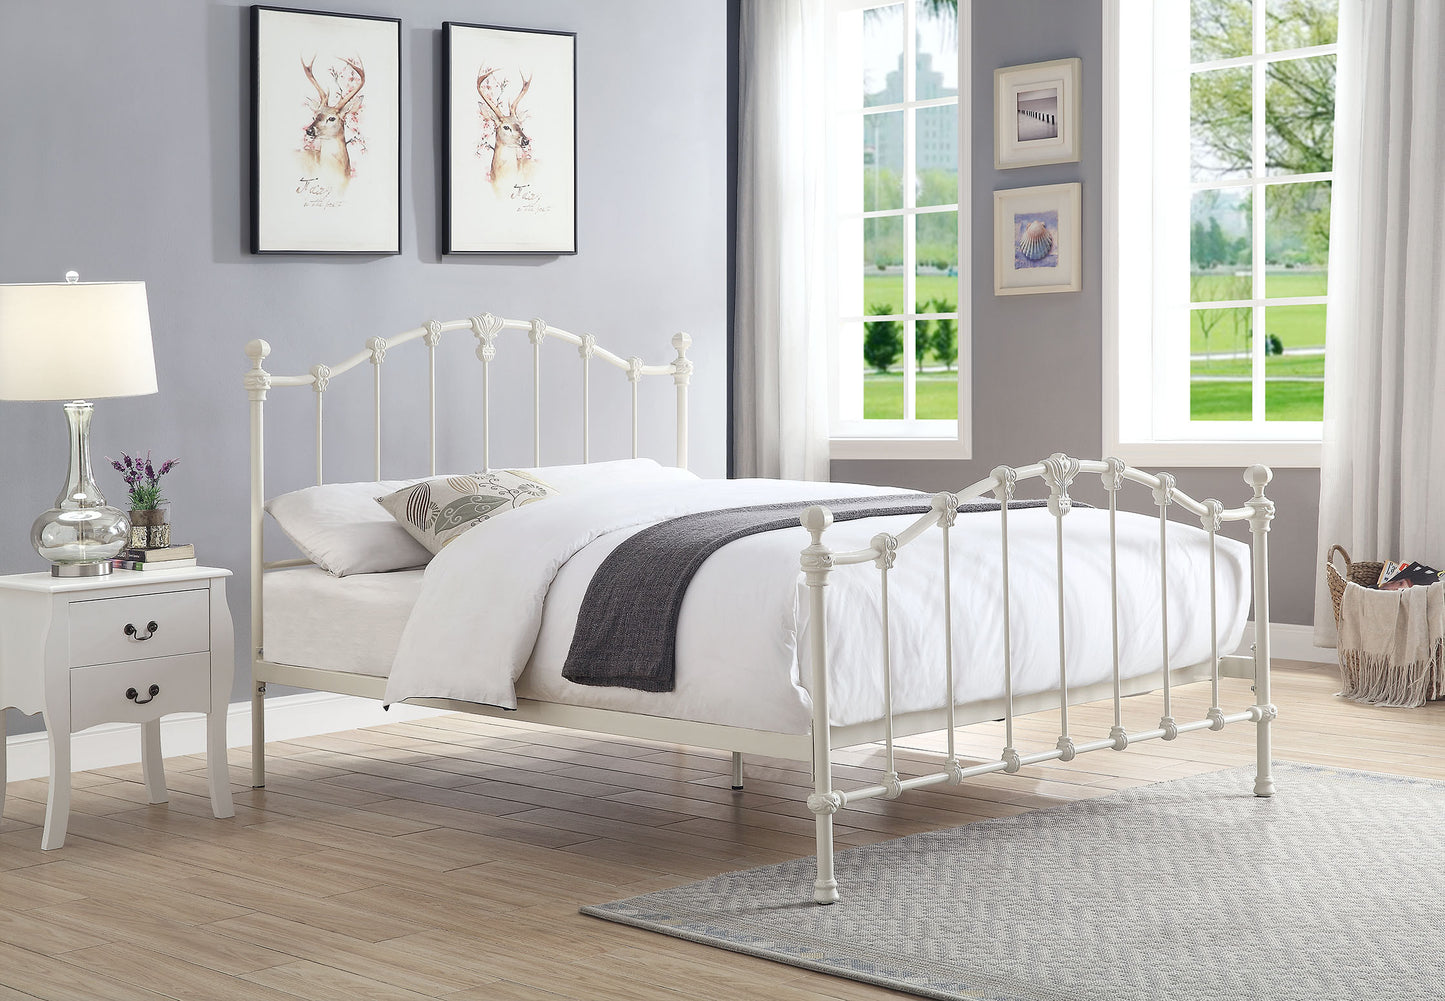 CLAREMONT King Single Size Cast and Wrought Iron Bed